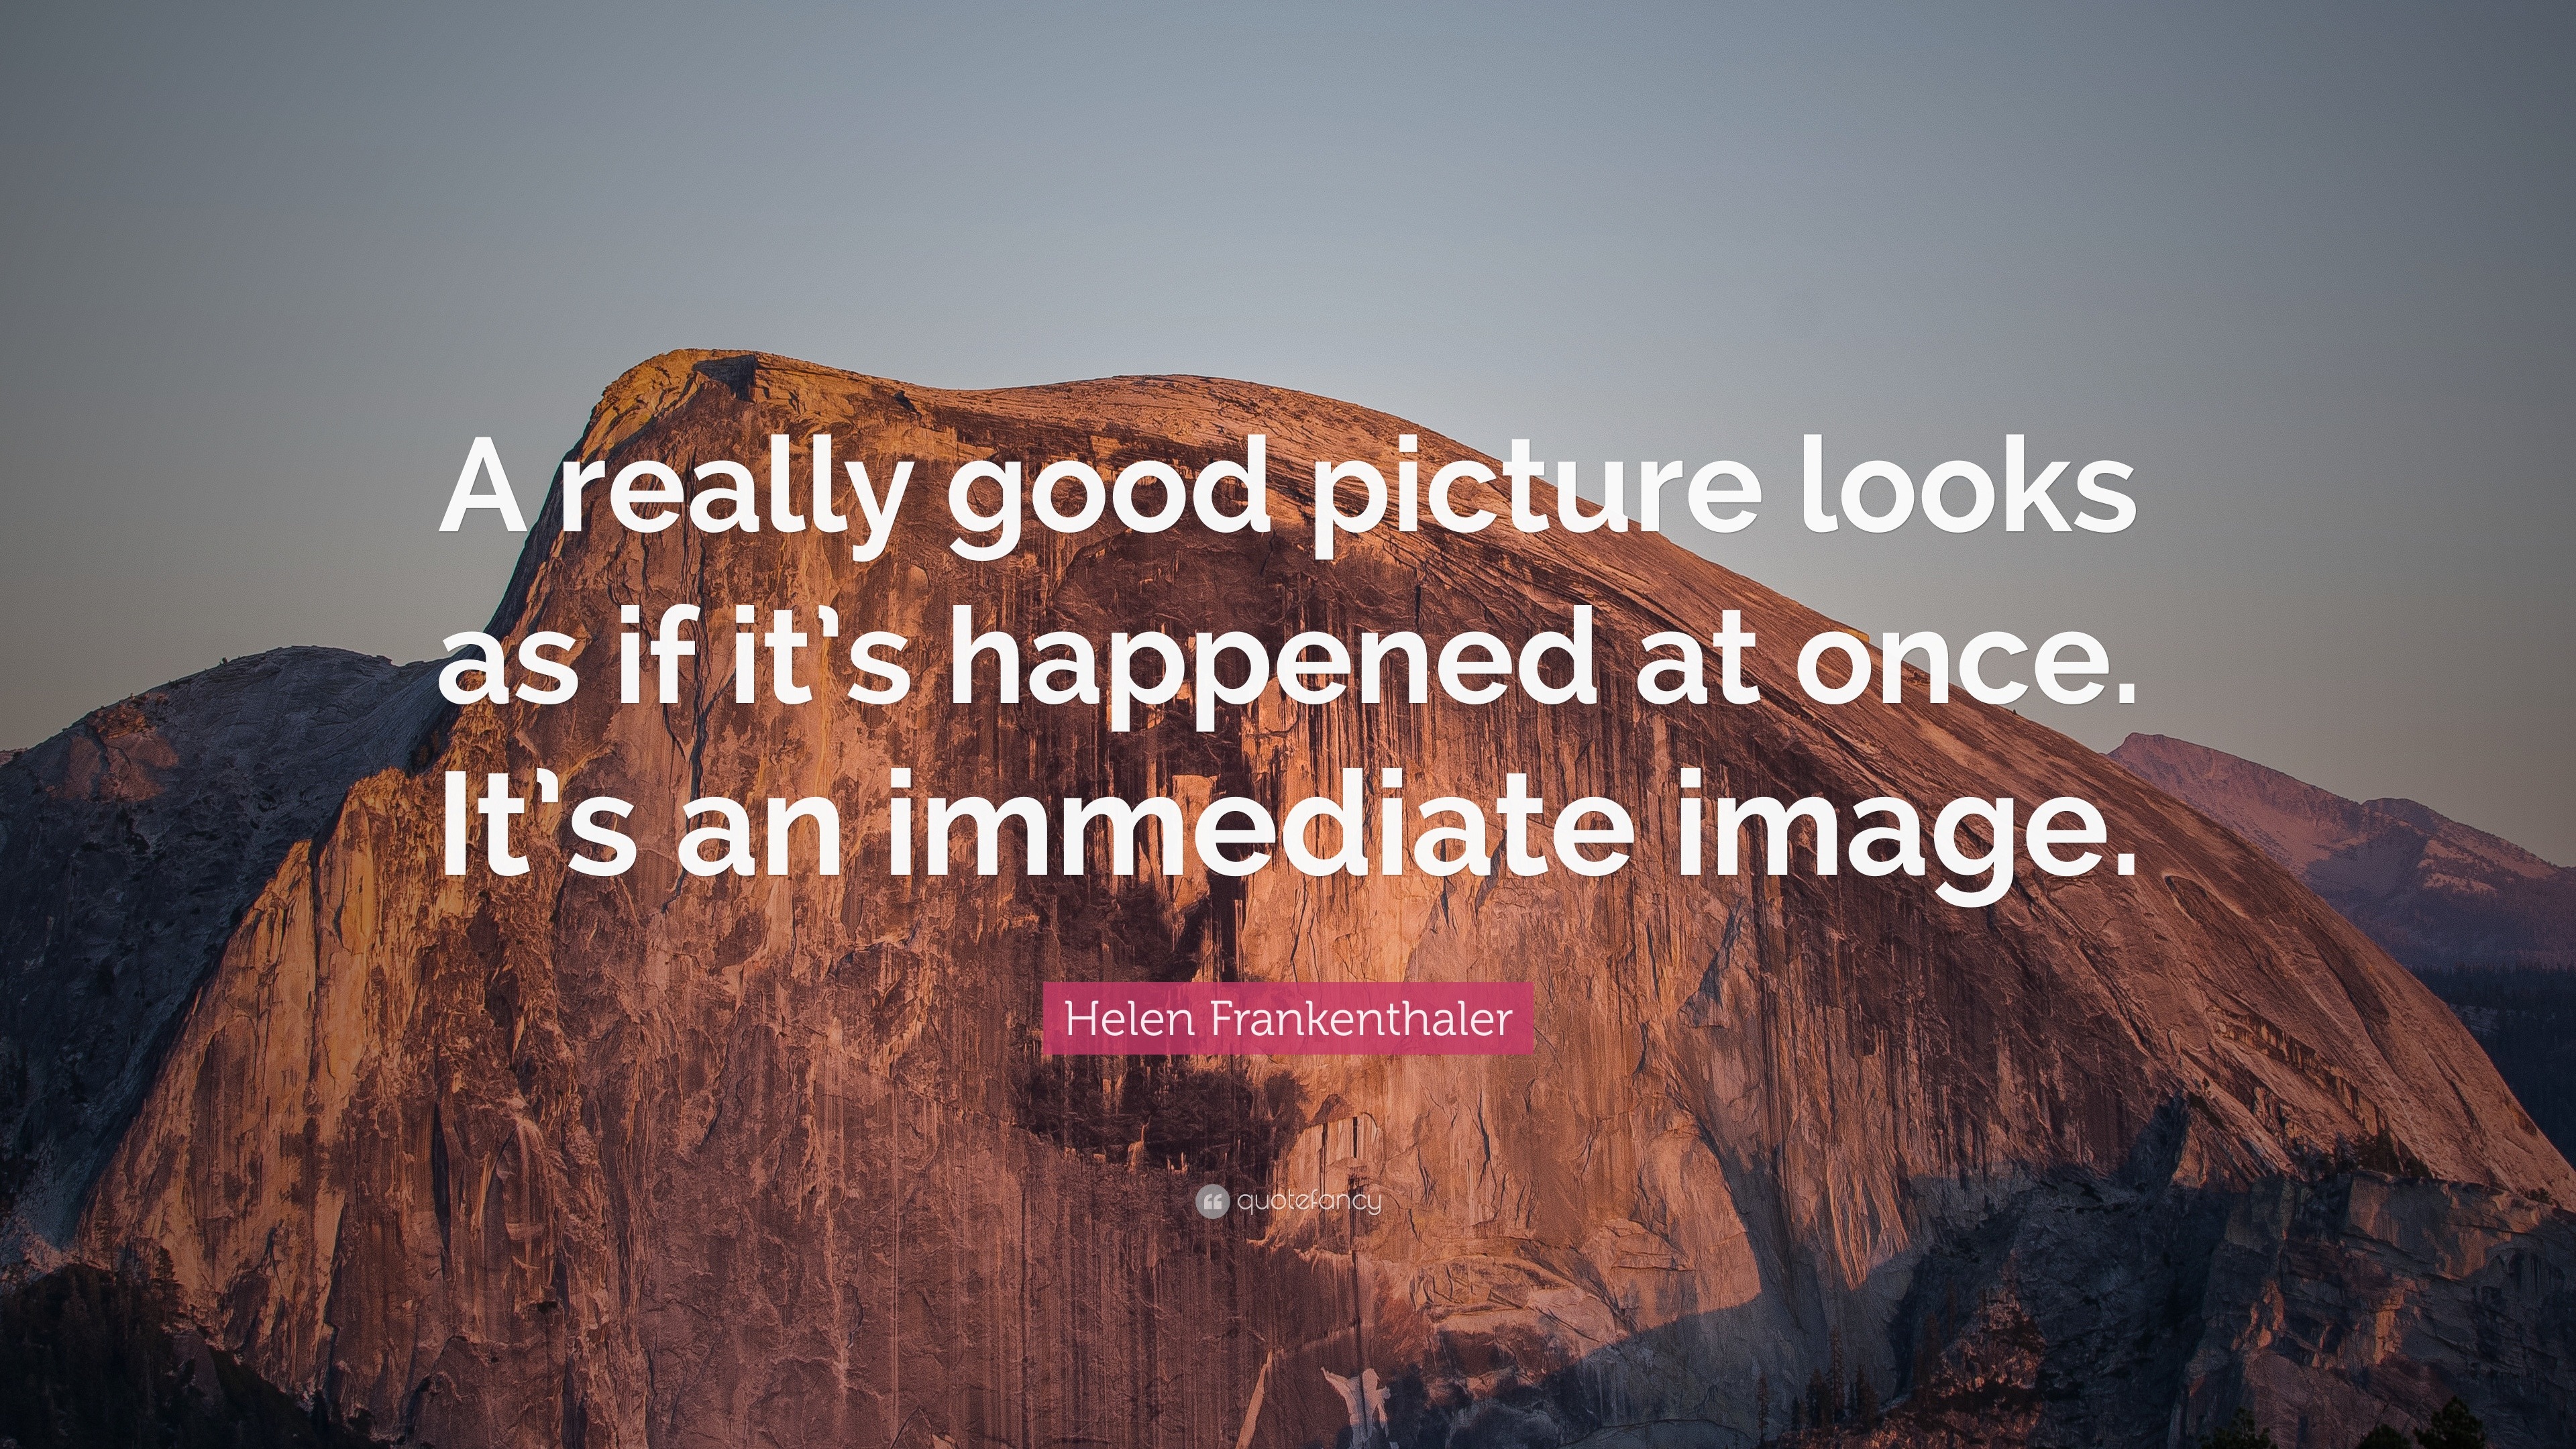 Helen Frankenthaler Quote: “A really good picture looks as if it’s ...